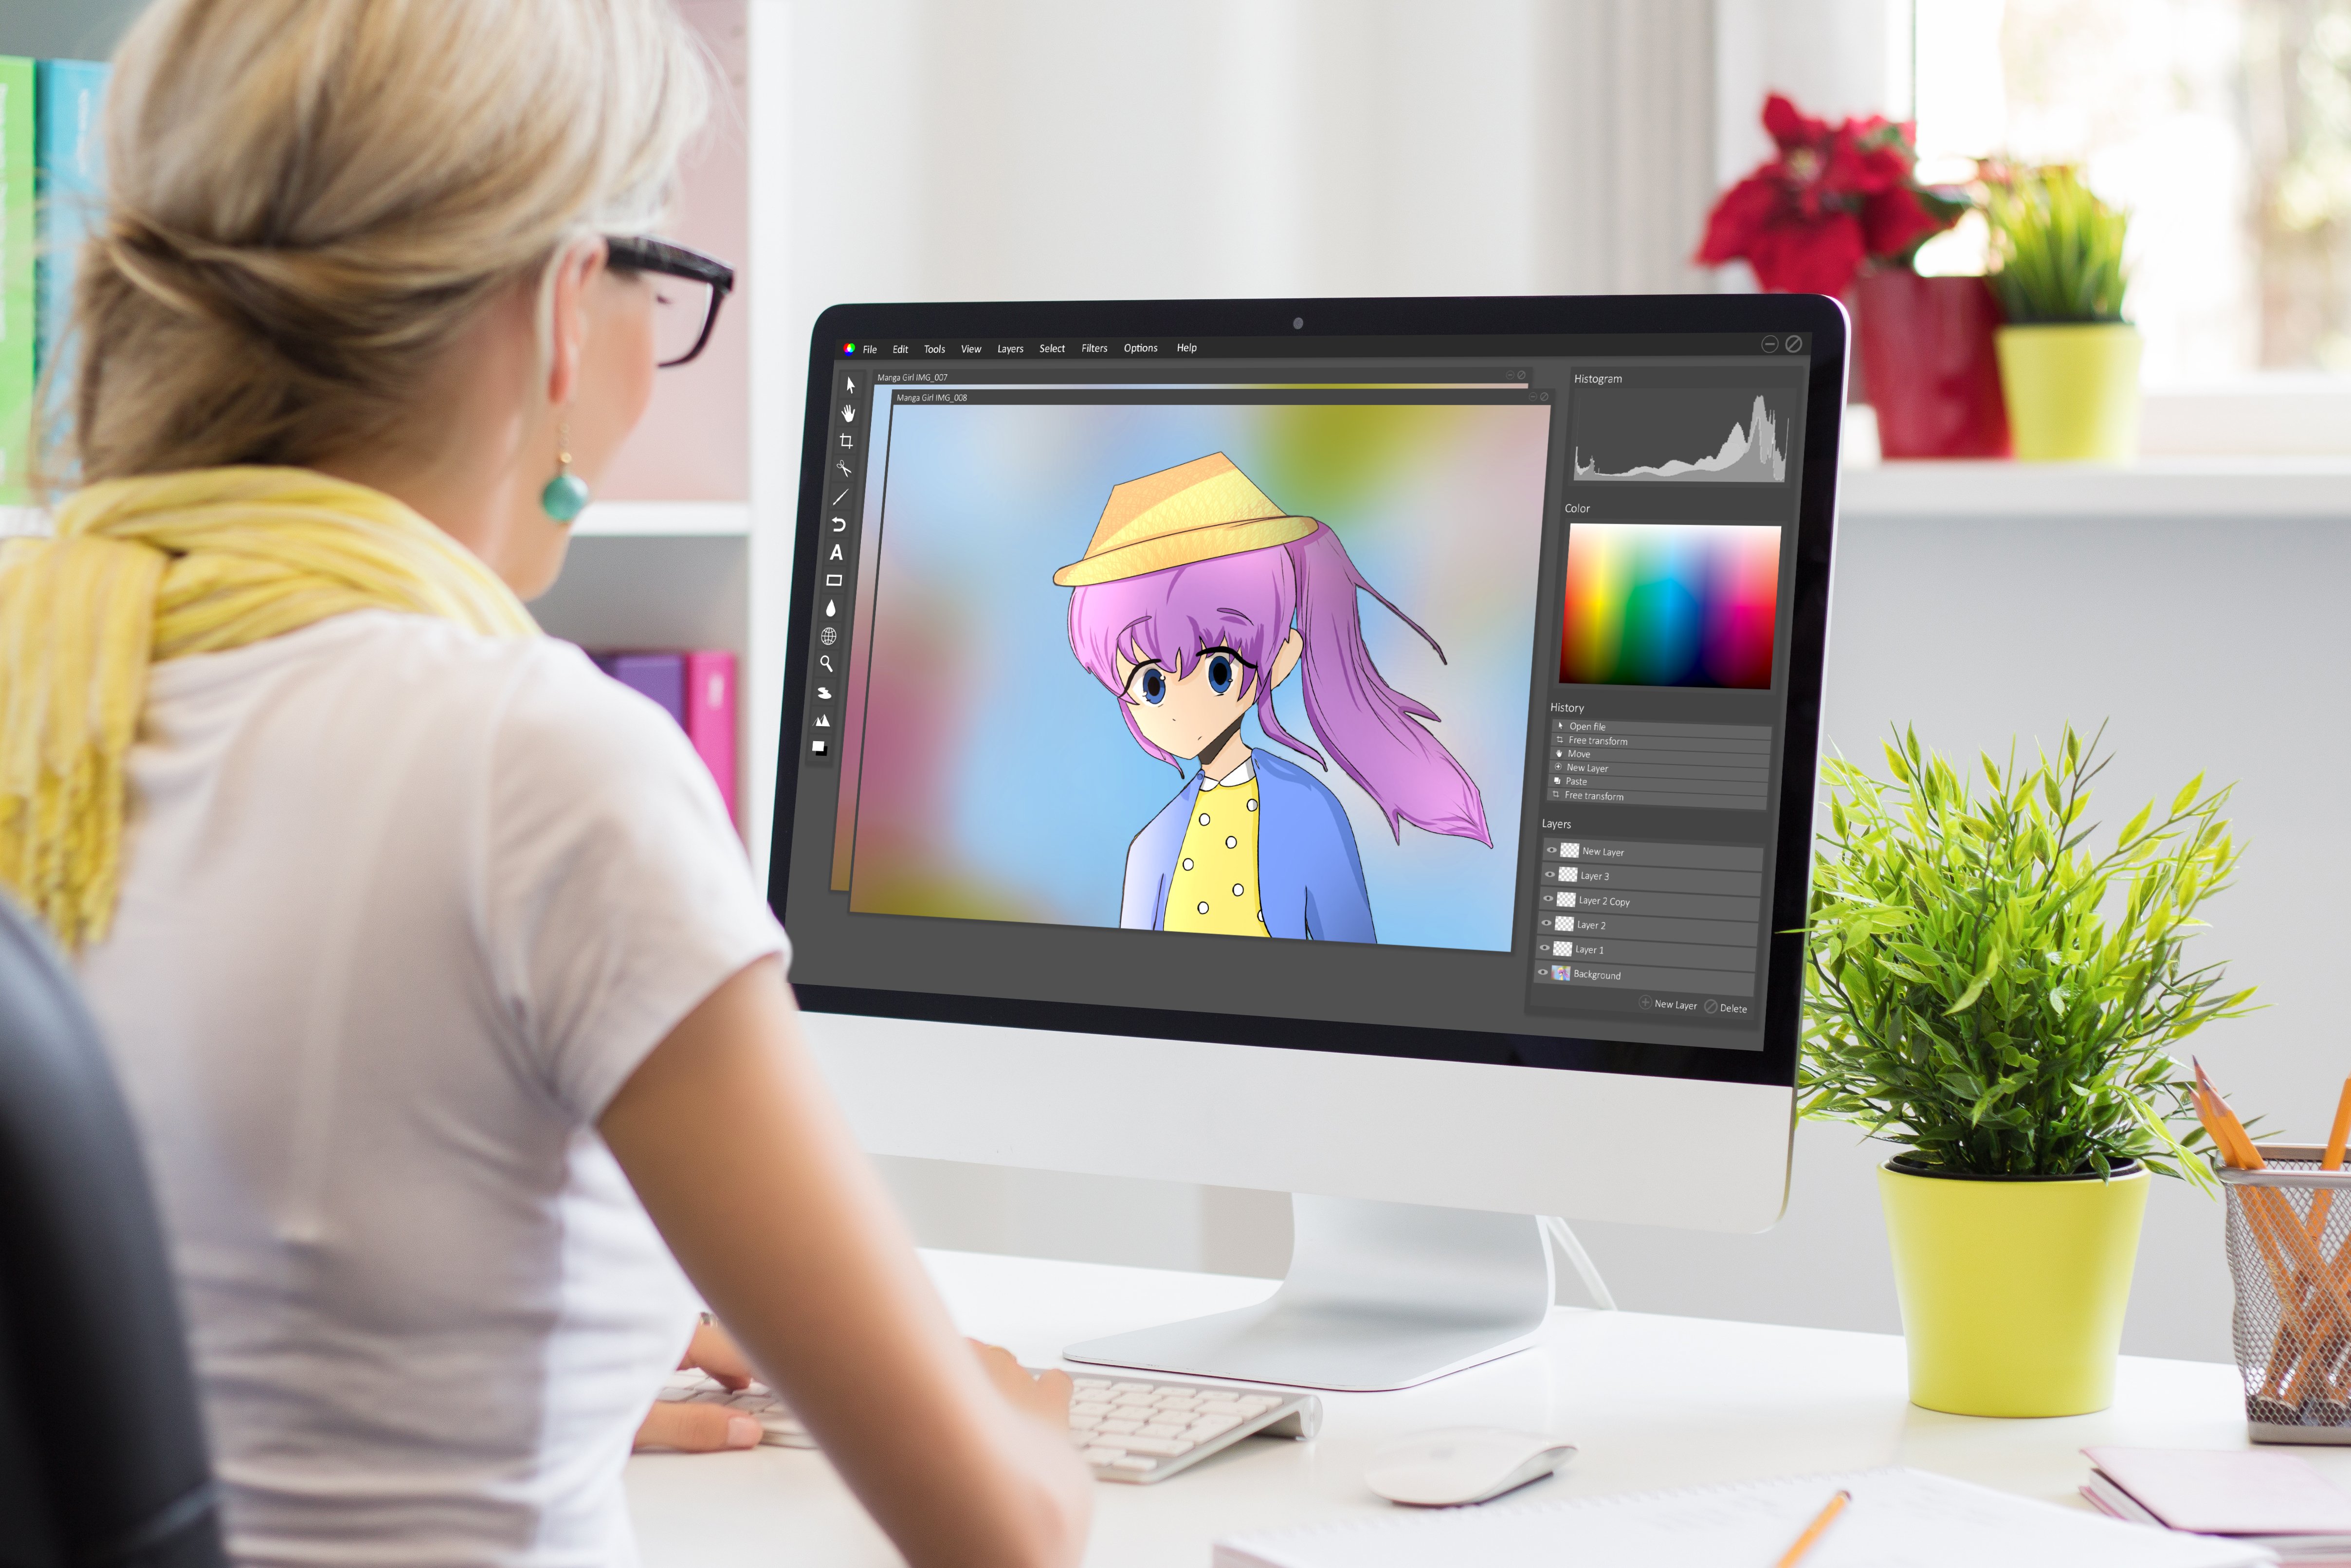 An animator drawing a character in image editing software